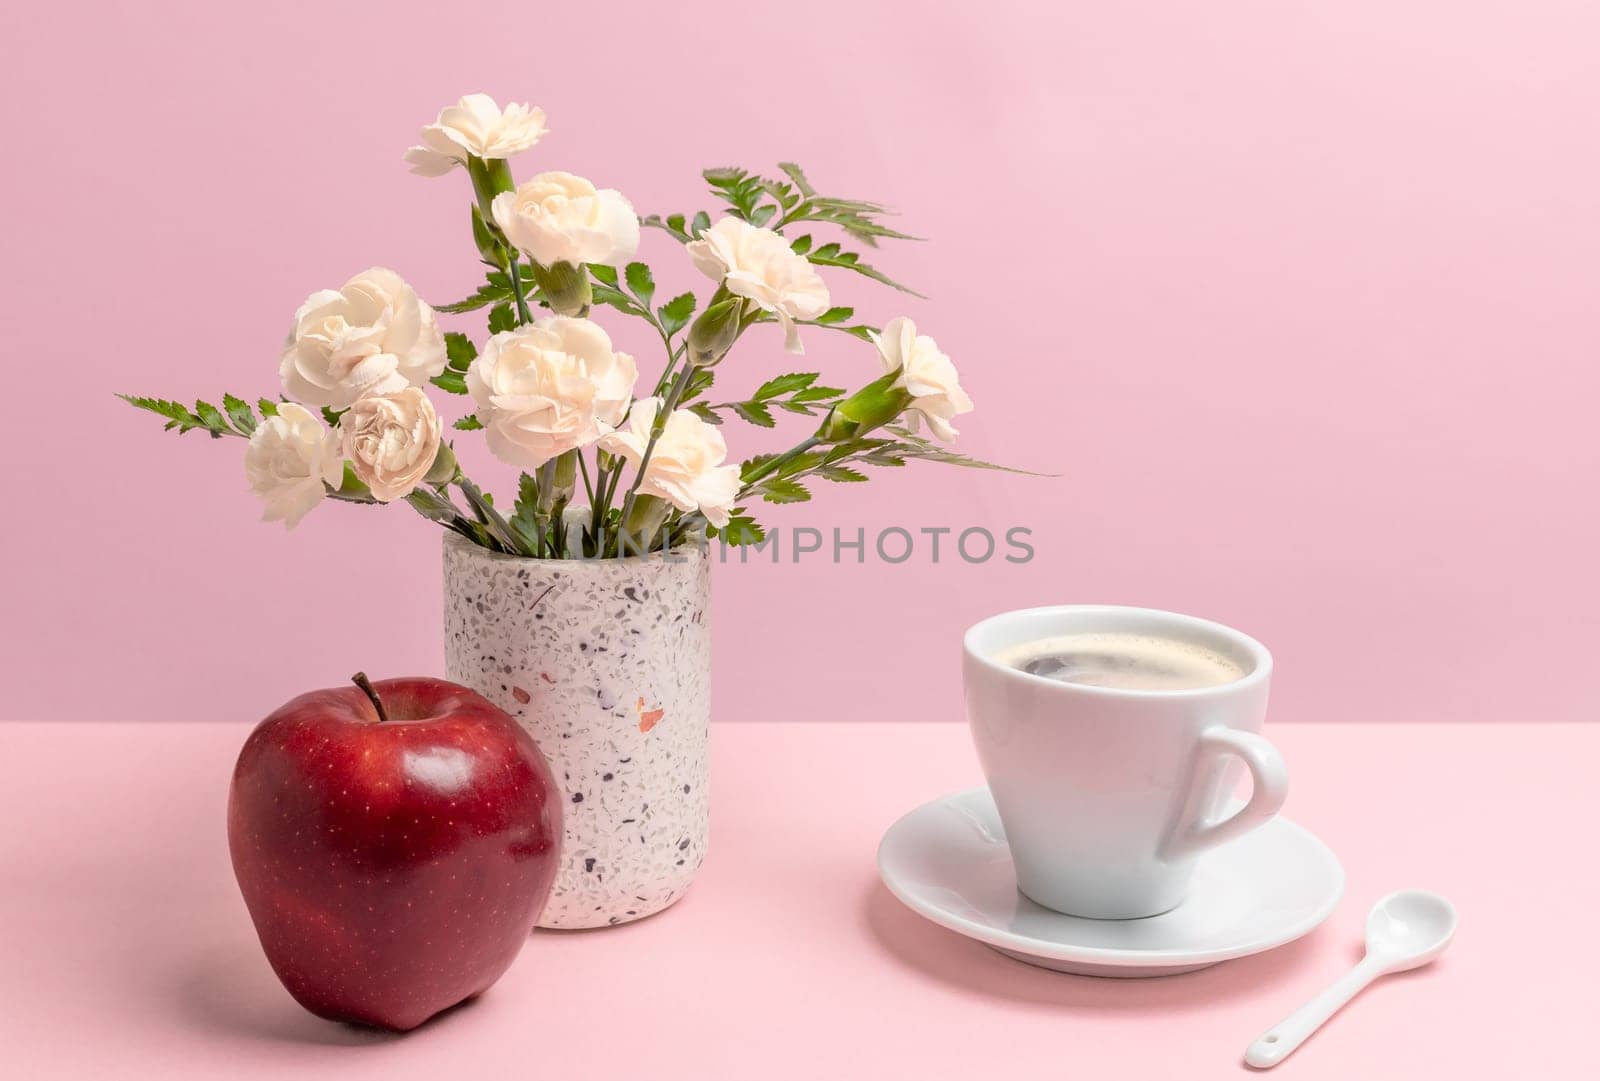 Bouquet of carnations in a vase with a an apple and a cup of coffee. by mvg6894